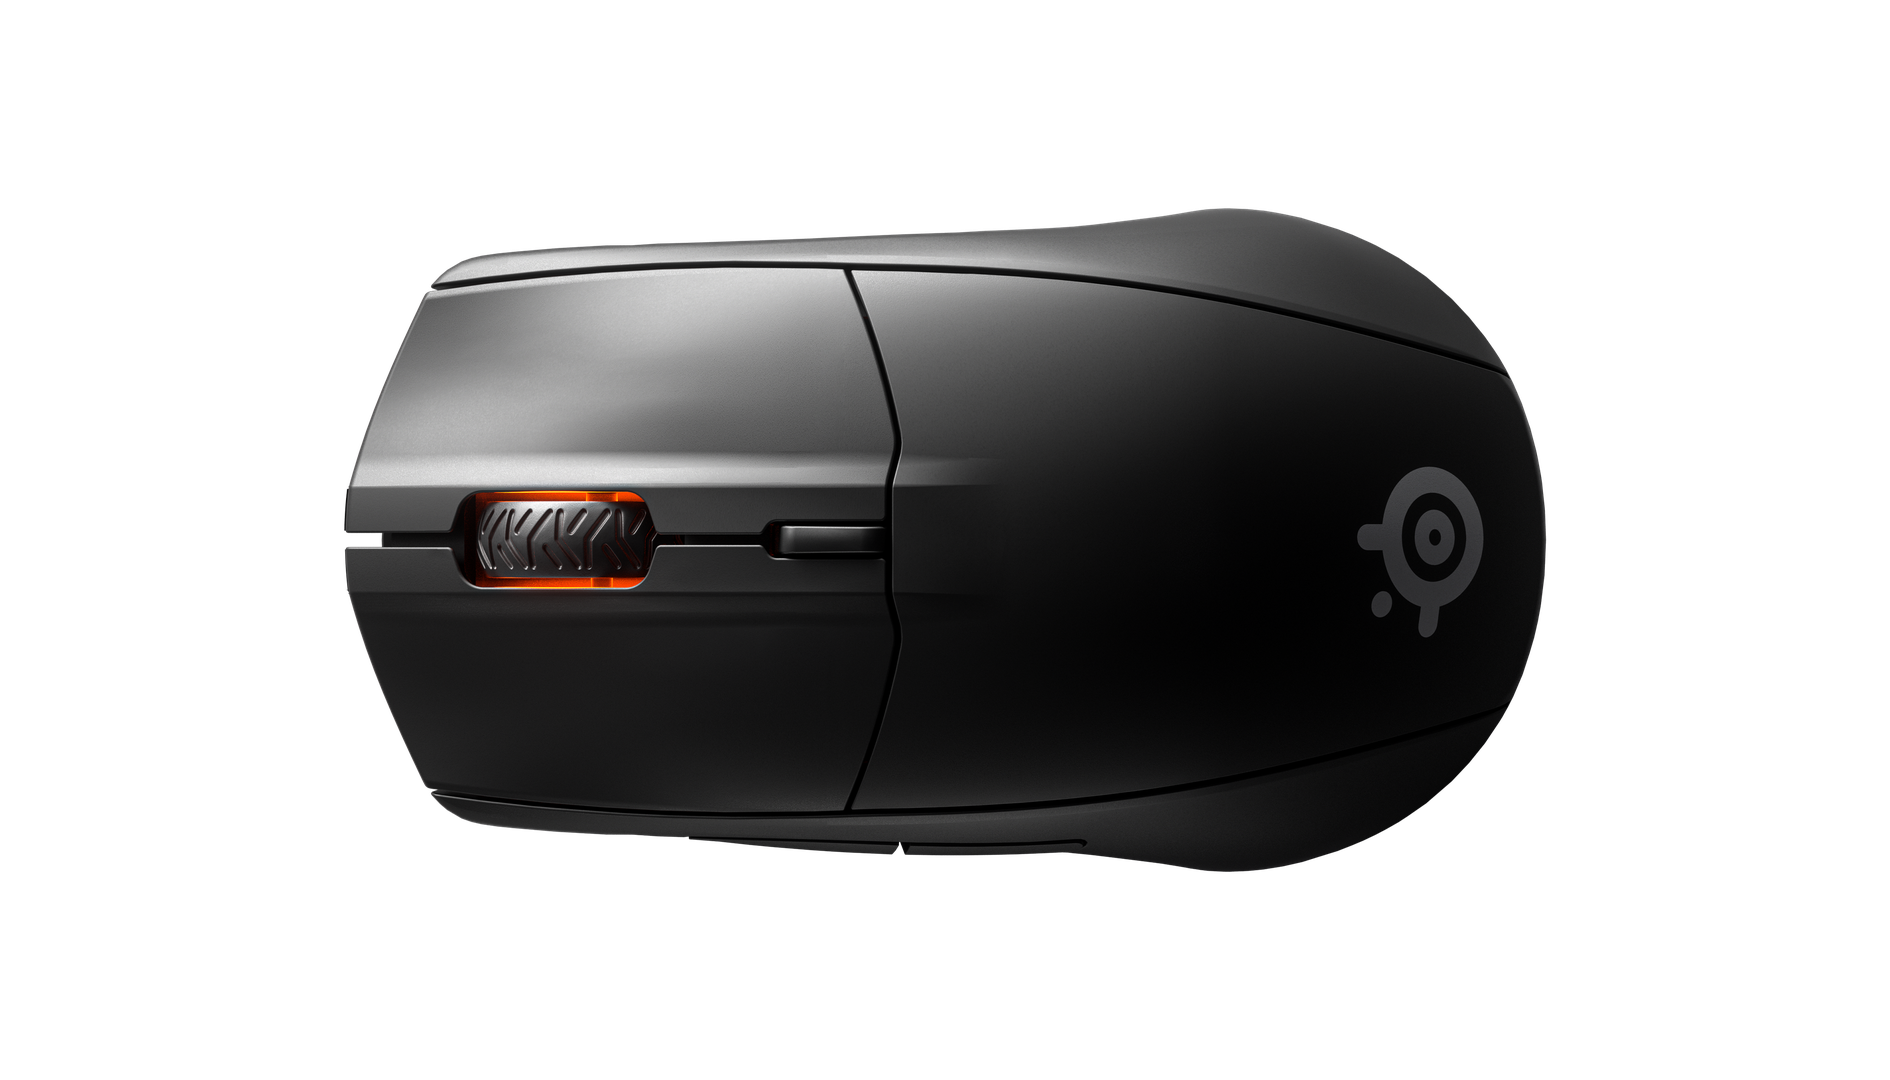 SteelSeries 62521 Rival 3 Wireless Gaming Mouse